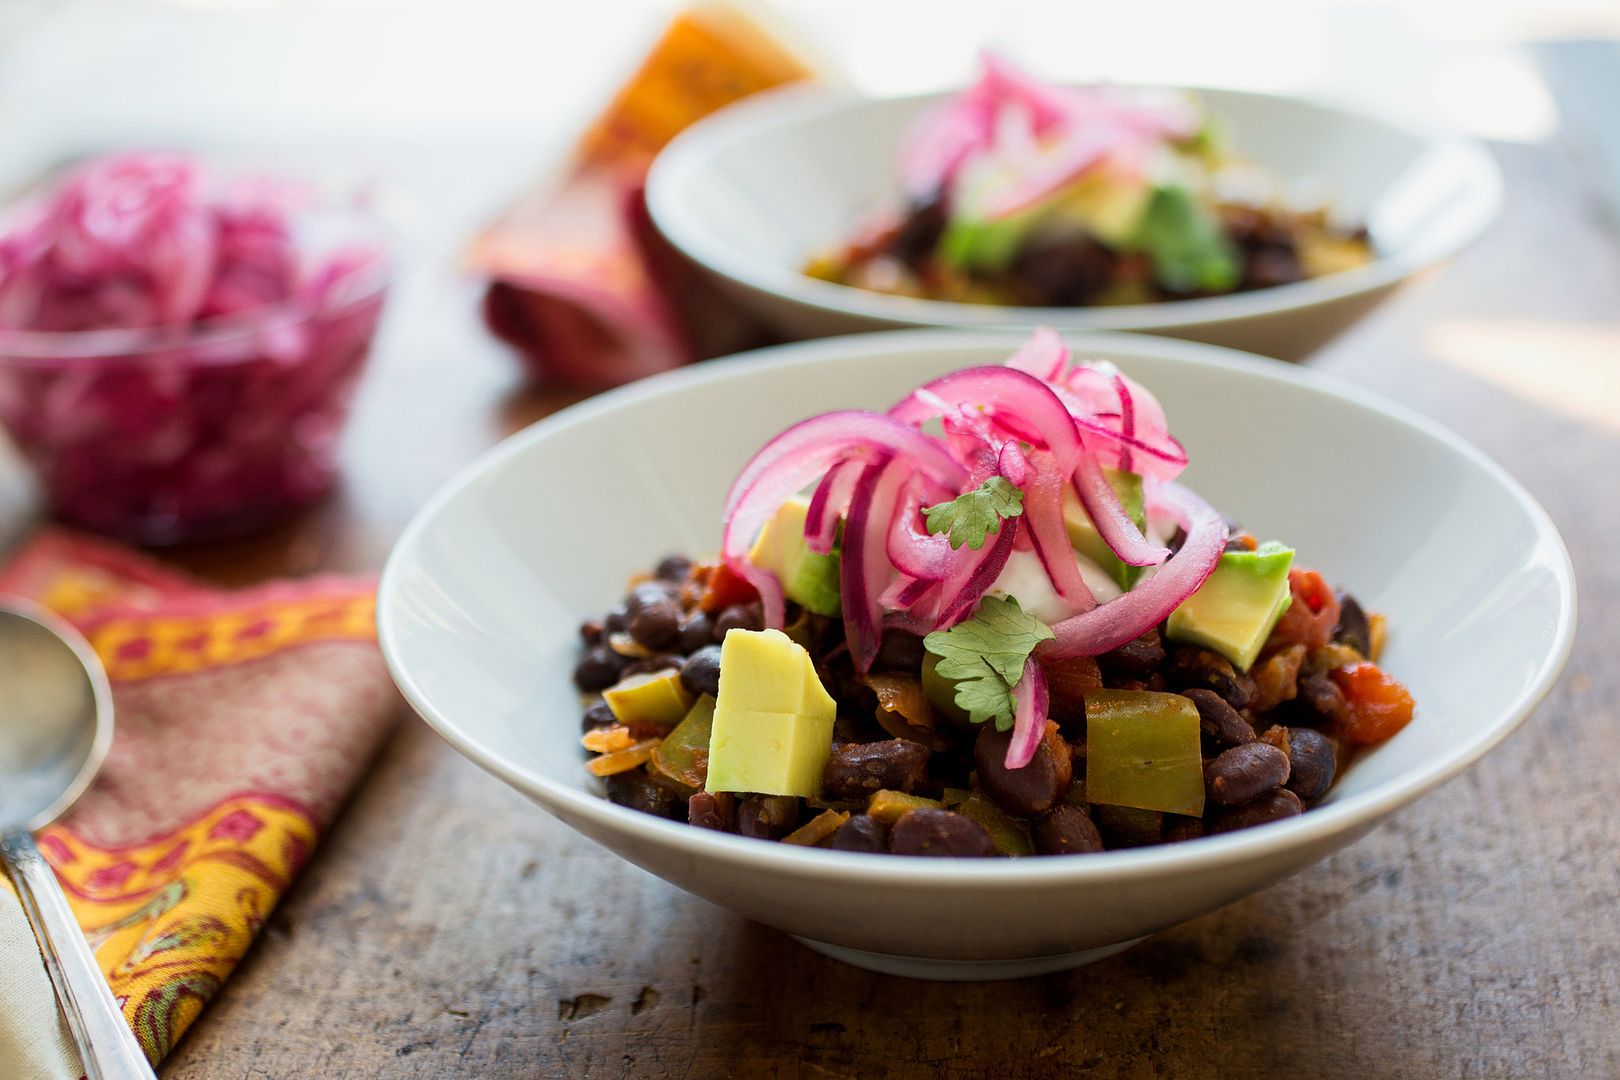 Cool Mom Eats weekly meal plan: This Vegetarian Skillet Chili only takes 30 minutes and is a great way to introduce #MeatlessMonday to picky eaters | The New York Times (photo: Andrew Scrivani)